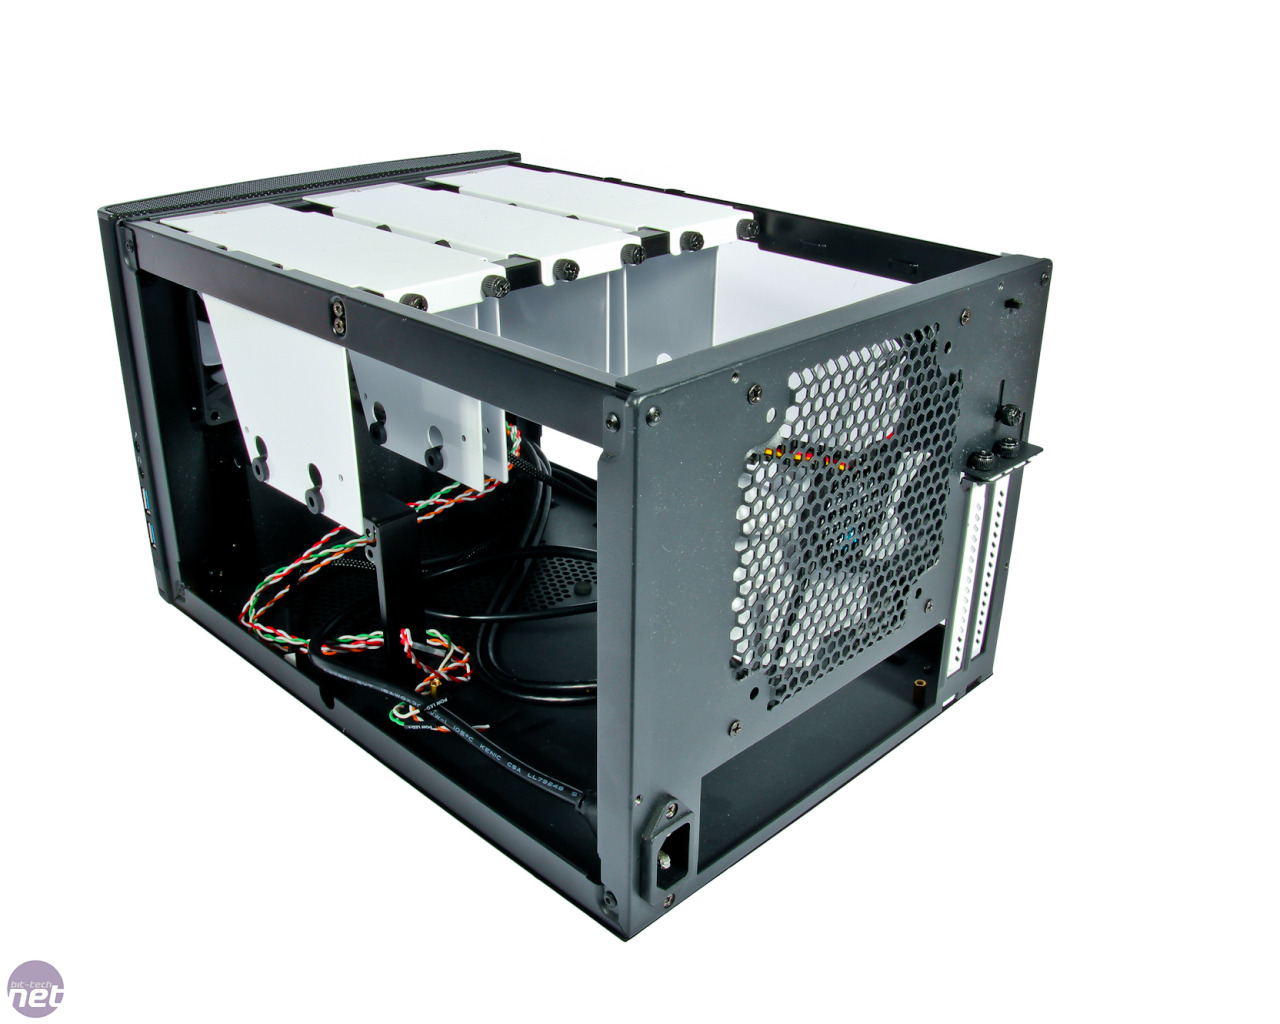 Fractal Design Node 304 mITX Case Review: Paving the Way to the